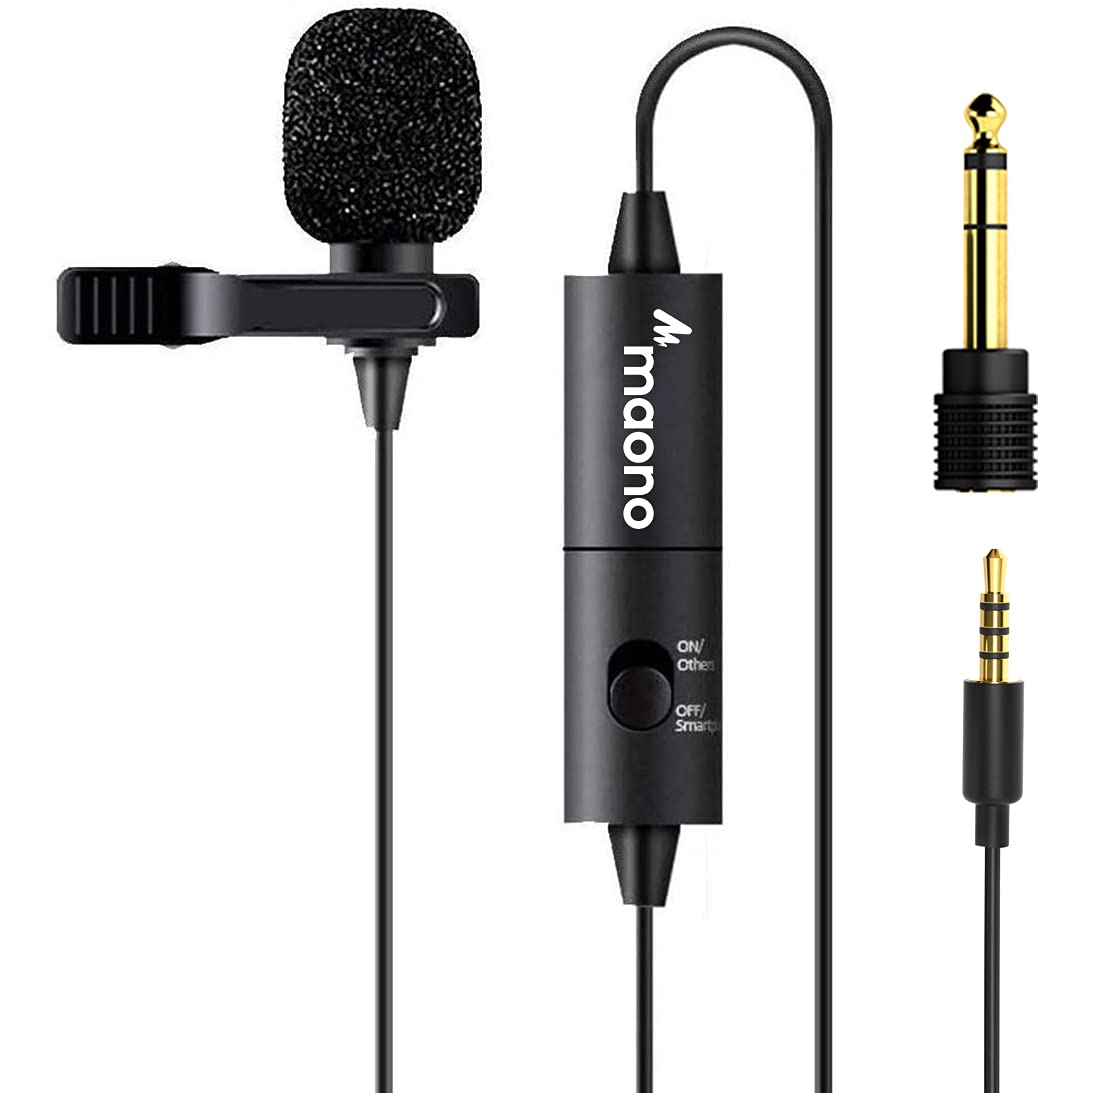 Maono AU-102 Lavalier microphone with -10dB attenuation